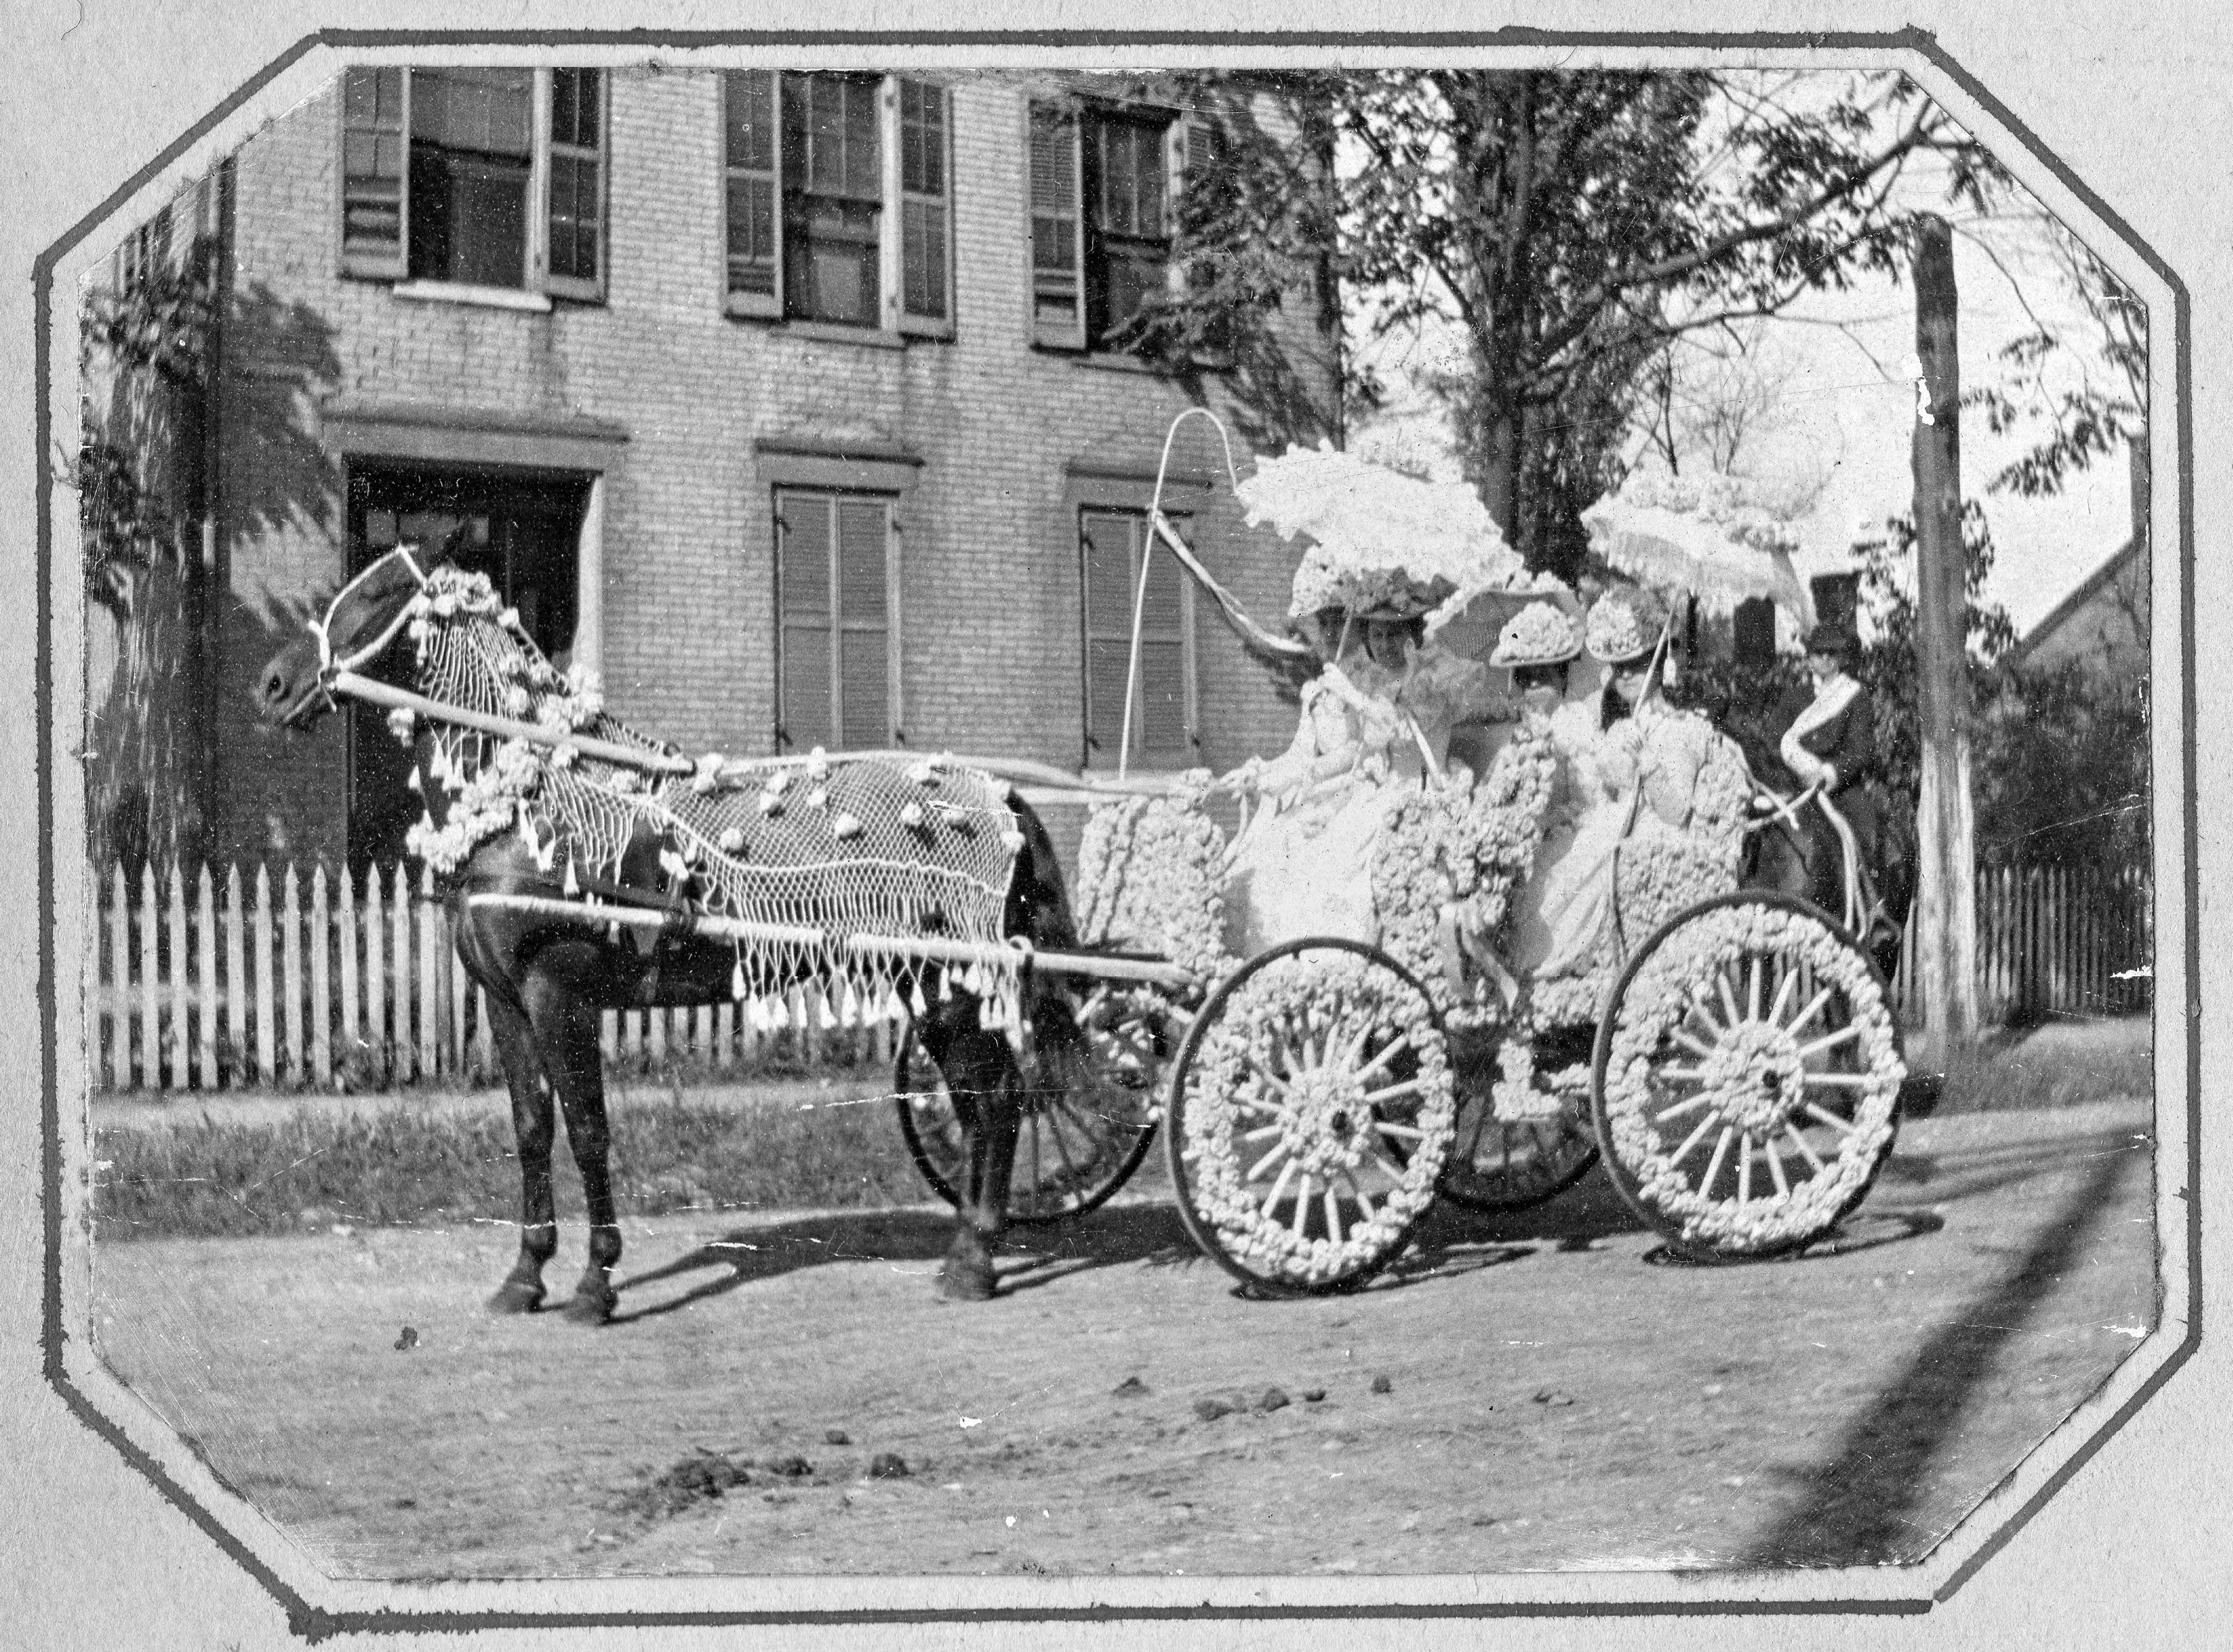 Single Horse Drawn Flower Parade float at the Belleville, Illinois, town fair in 1901.

Photo taken by Samuel Peake Hyde, b. Feb 17, 1850, St. Francisville, Clark, Missouri; d. April 28, 1921, Belleville, St. Clair, Illinois., son of Edwin C. Hyde and Elizabeth Hyde. Samuel was a clerk for J. G. Green Company, 1867, and then worked with his father at E.C. Hyde & Co., Storage and Commission, 4 South Commercial Street, Belleville, IL. Sam resided at 37 North Douglas, Belleville.
